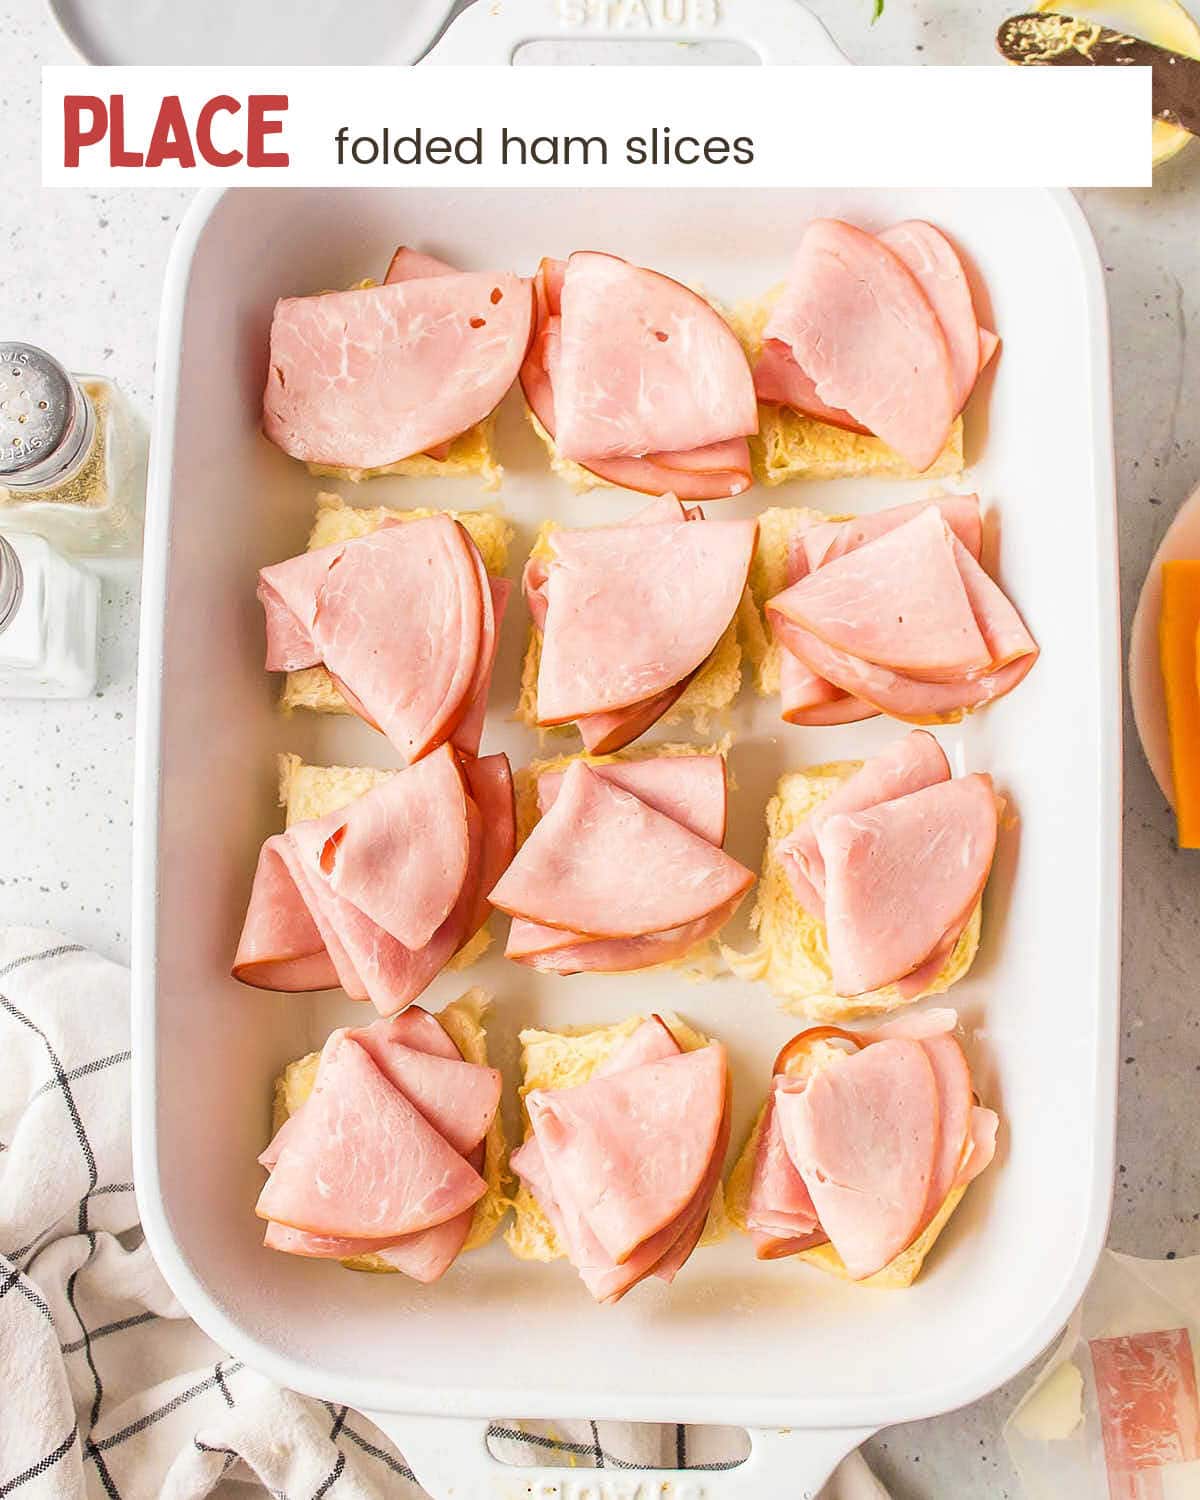 Folded ham slices in a baking dish.